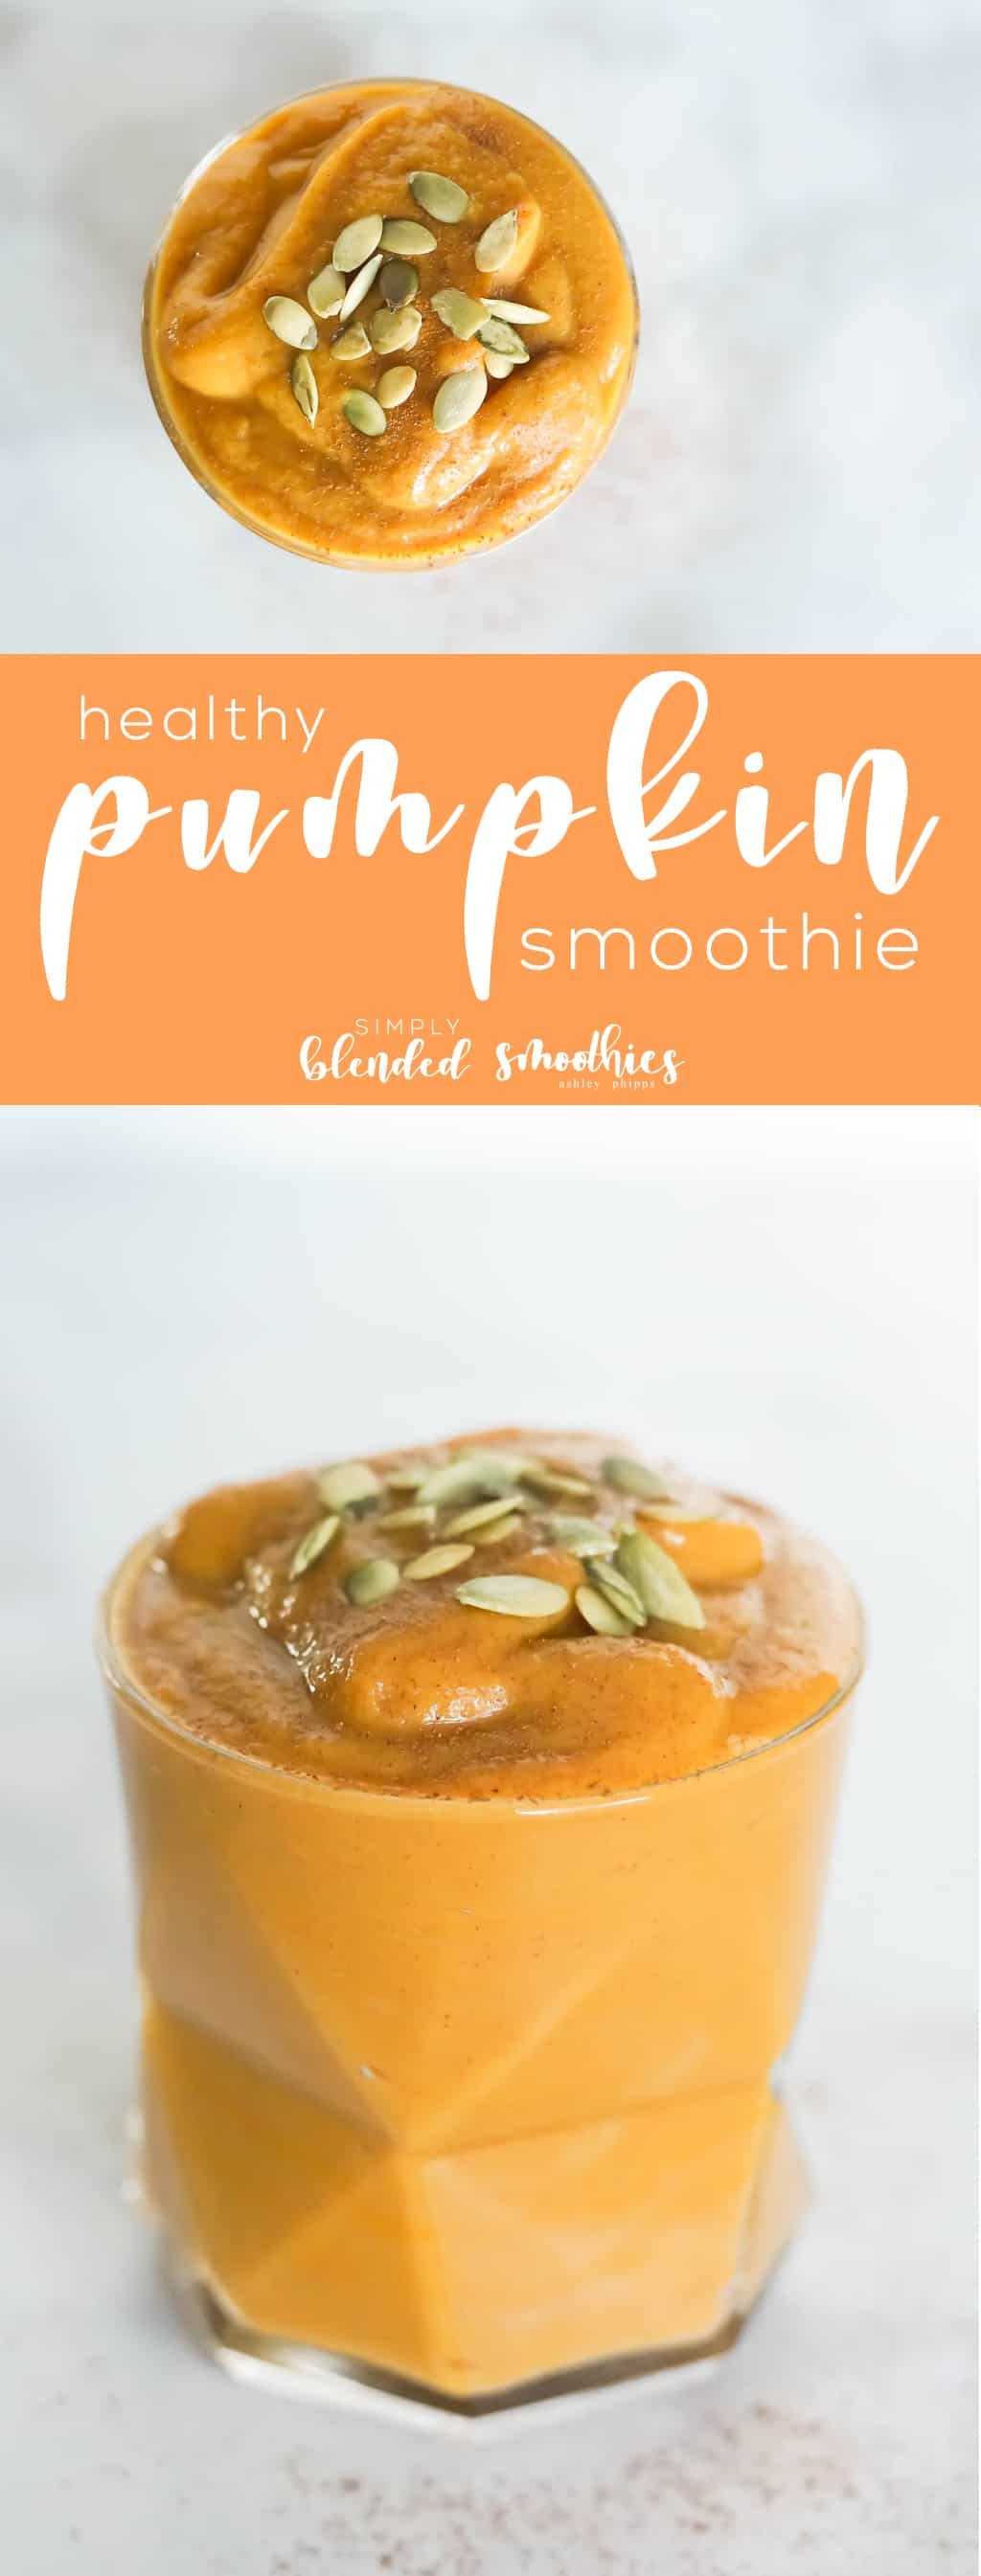 Healthy Pumpkin Smoothie - This Delicious Pumpkin Smoothie Is The Perfect Fall Breakfast Or Snack